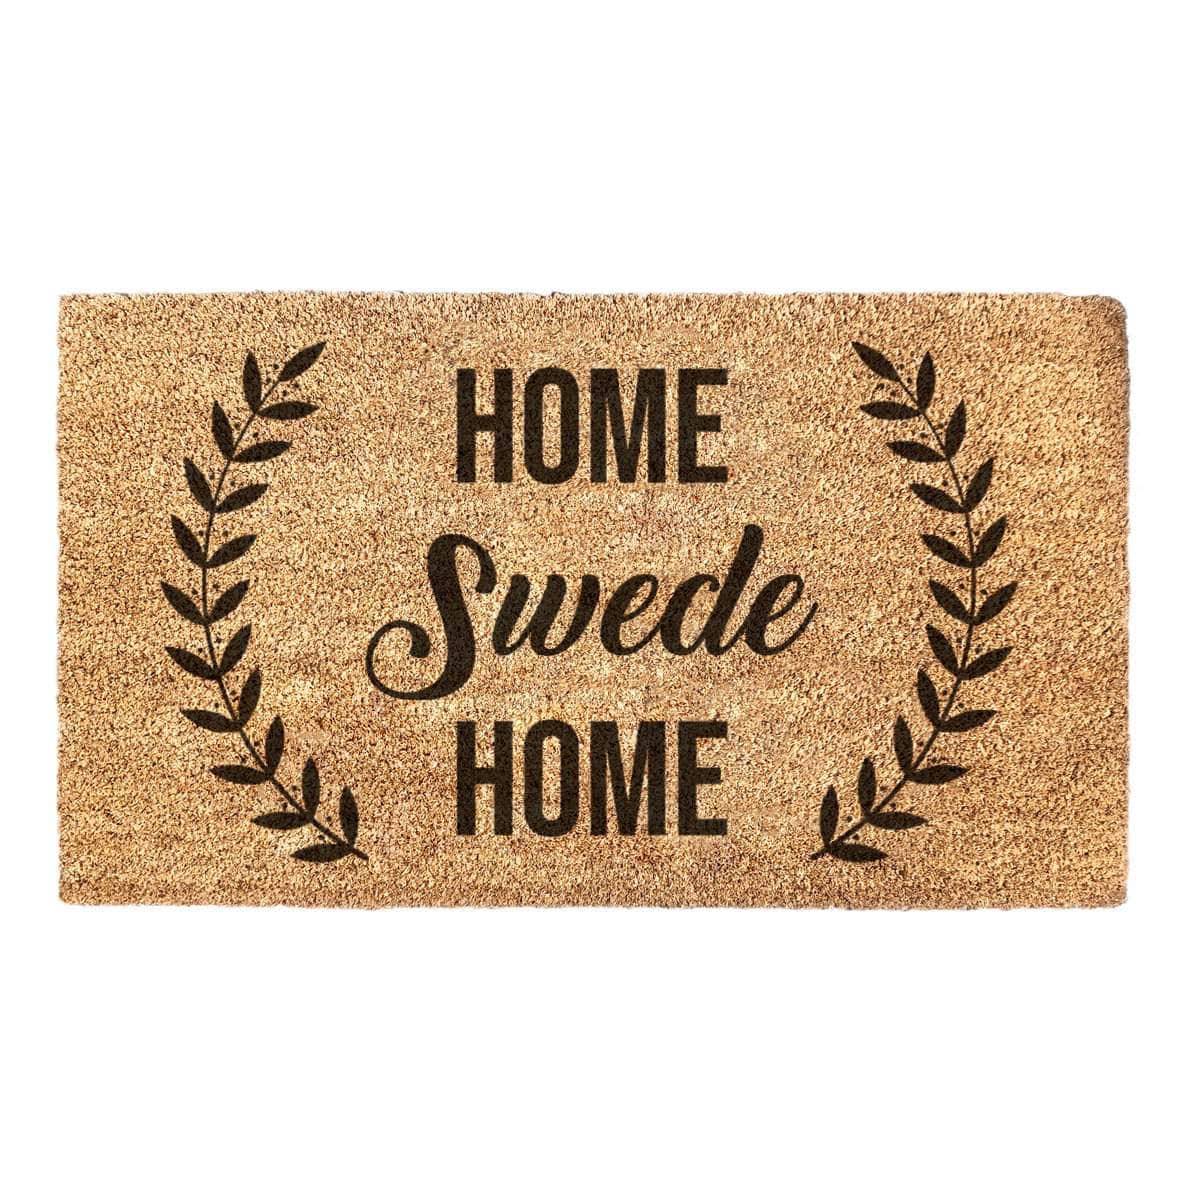 Home Swede Home - Cute Swedish Family Doormat